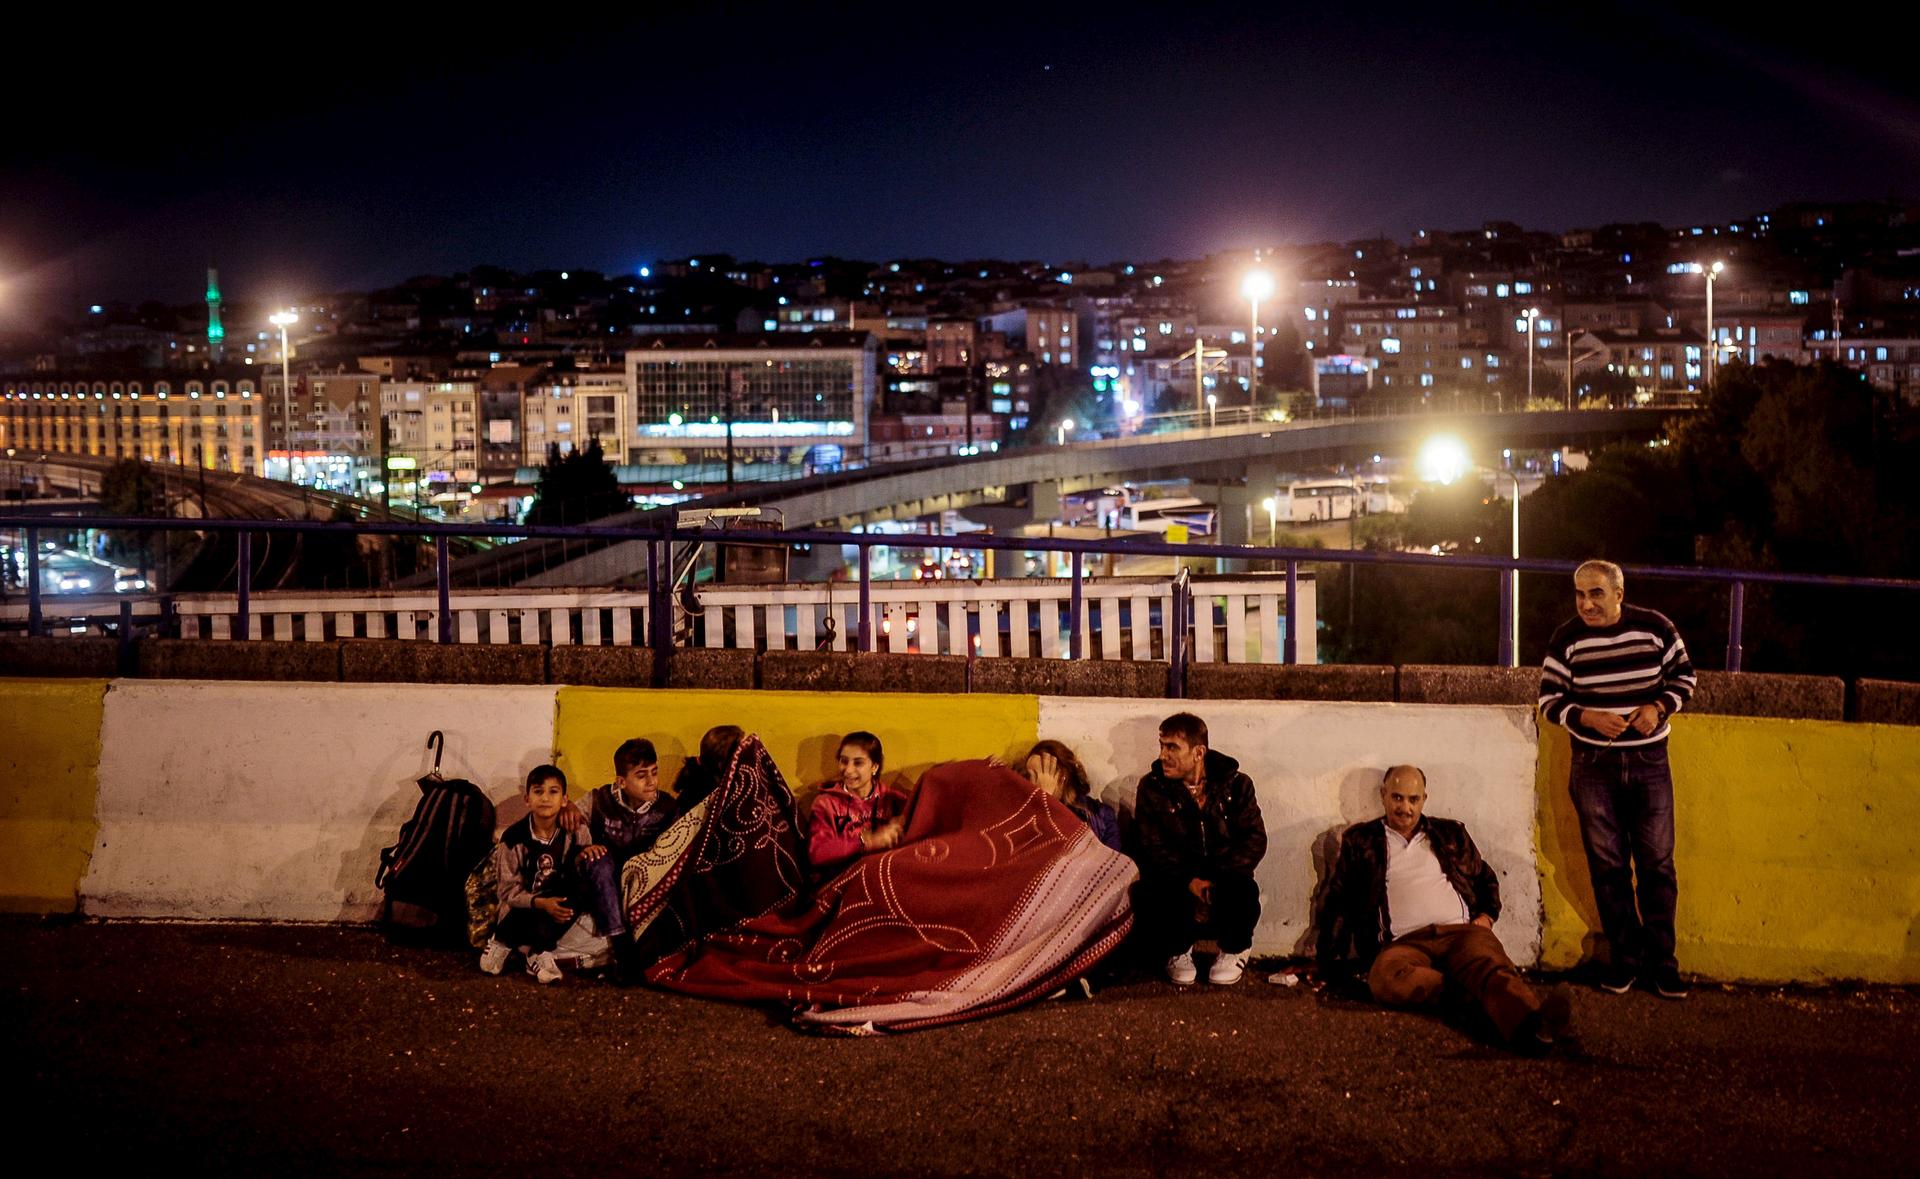 A migrant family spends the night near the main bus station in Istanbul on Sept. 17, 2015.